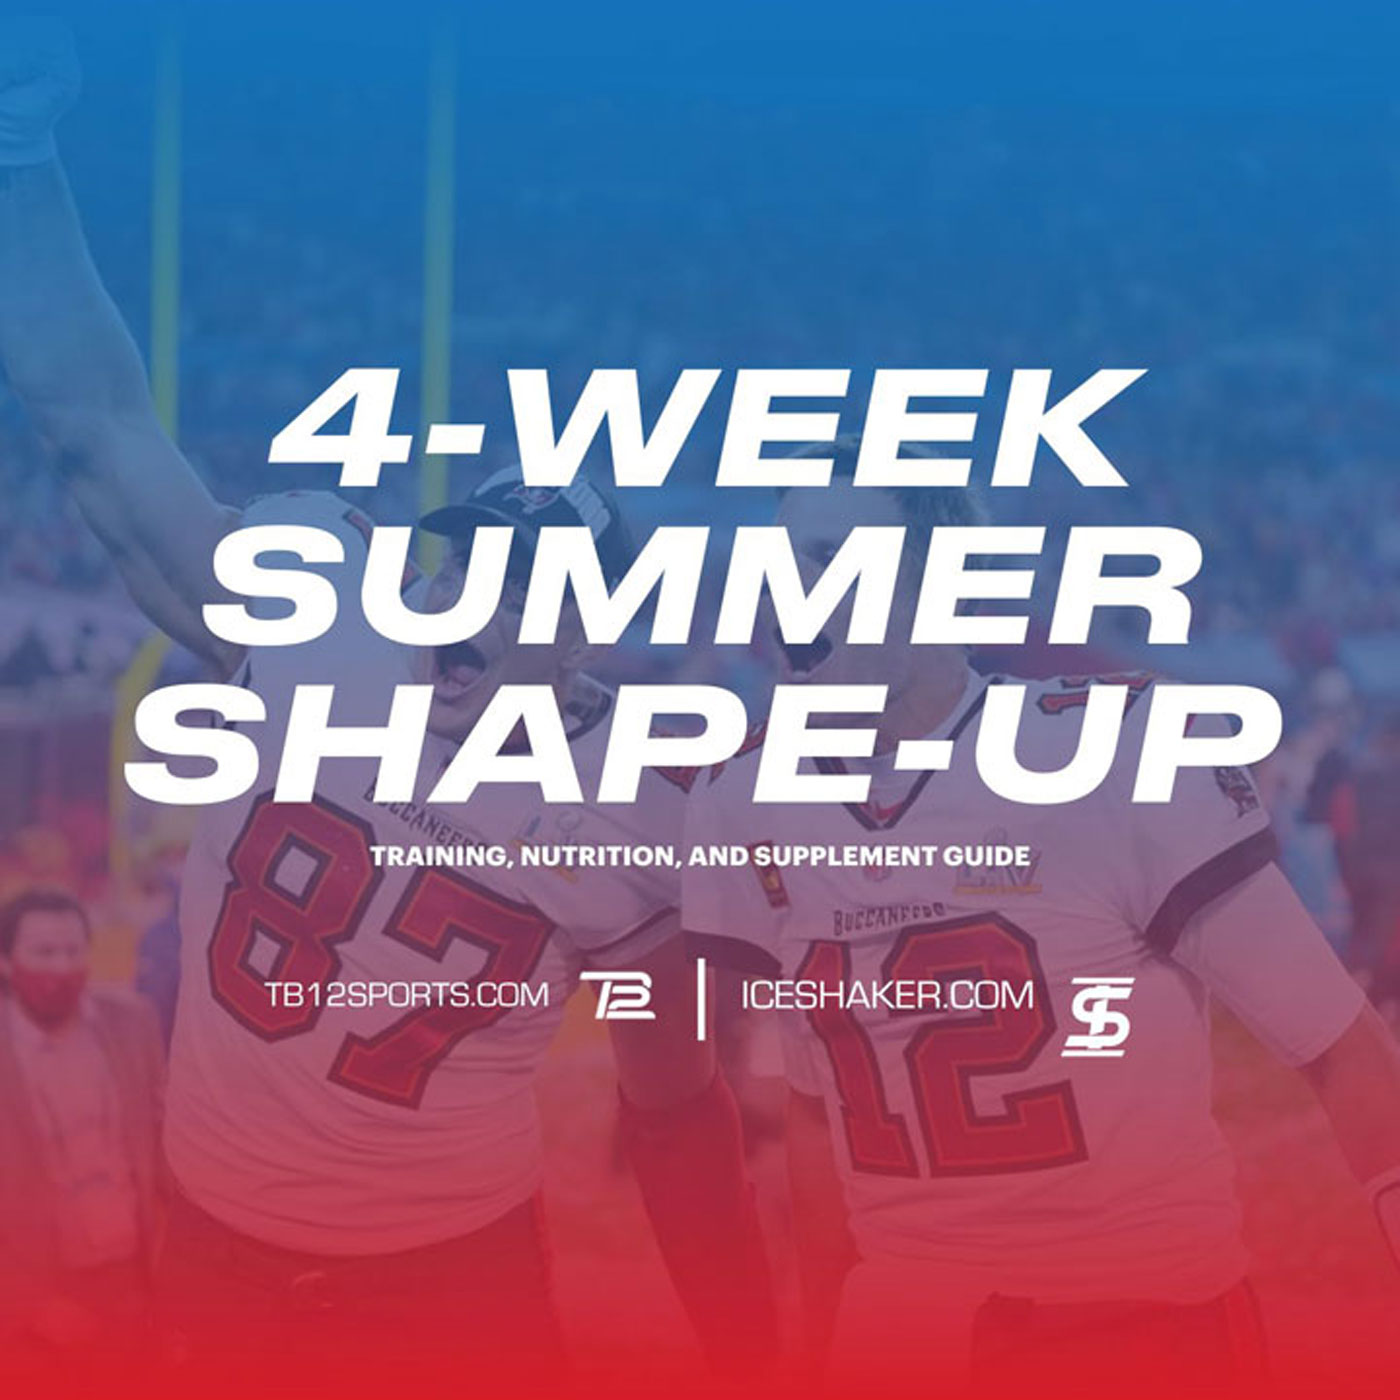 an image with NFL Players Rob Gronkowski and Tom Brady celebrating after winning a game on the Tampa Bay Bucanners. Overlayed on the image is text that says "4-WEEK SUMMER SHAPE-UP: Training, Nutrition, and Supplement Guide.